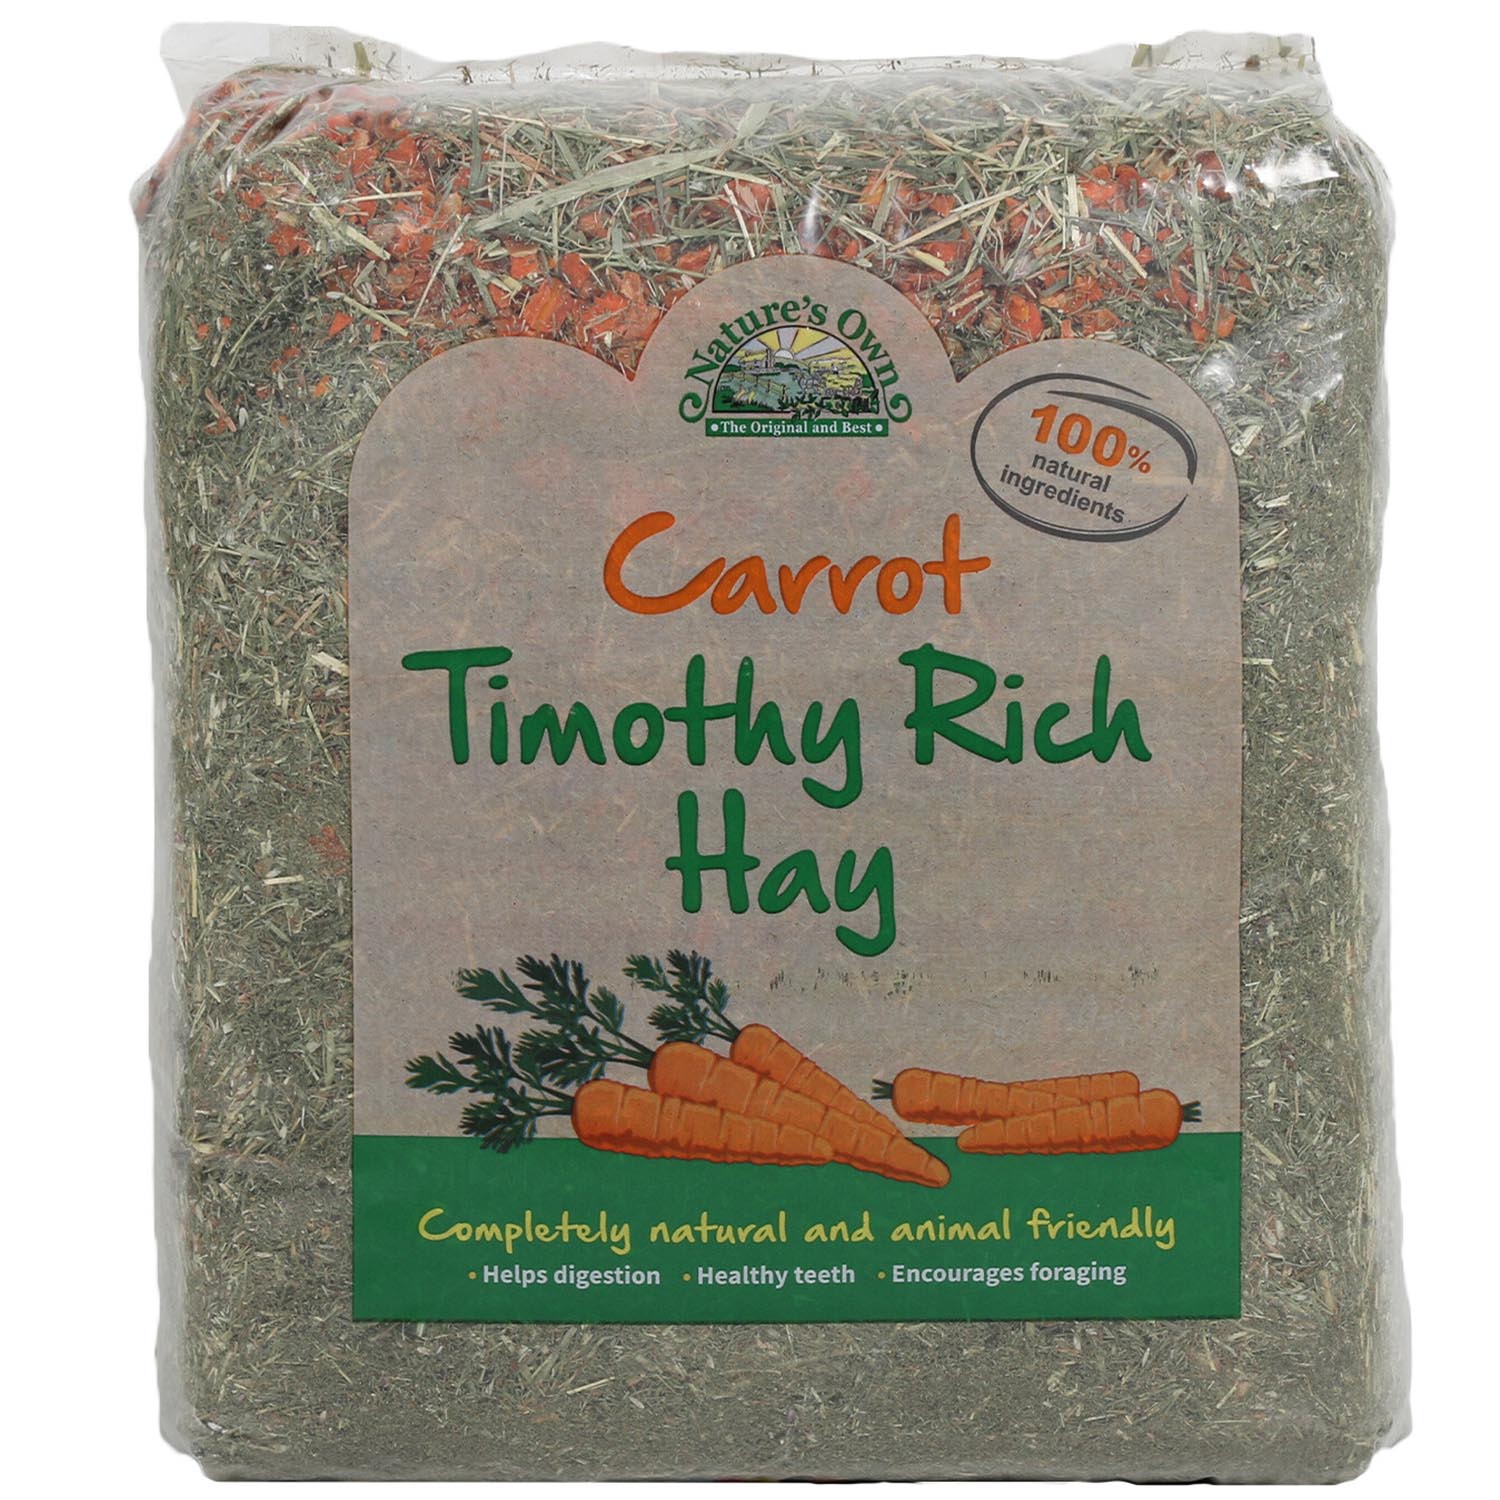 Nature's Own Timothy Rich Hay with Carrot Small Animal Treat Image